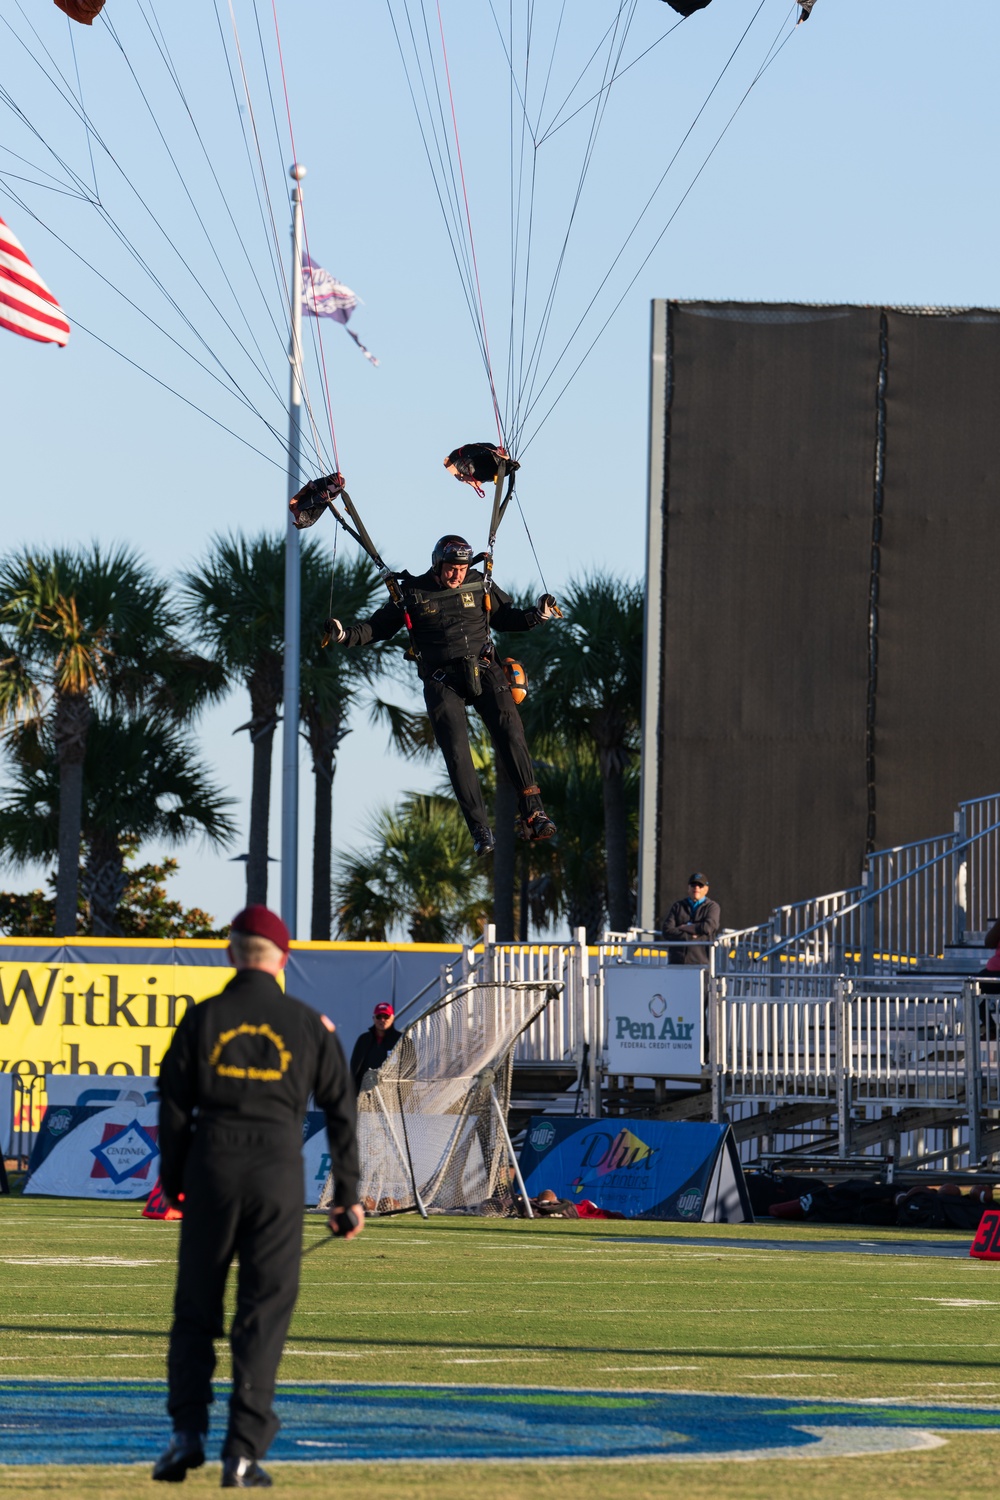 U.S. Army Parachute Team jumps in to football game in Florida